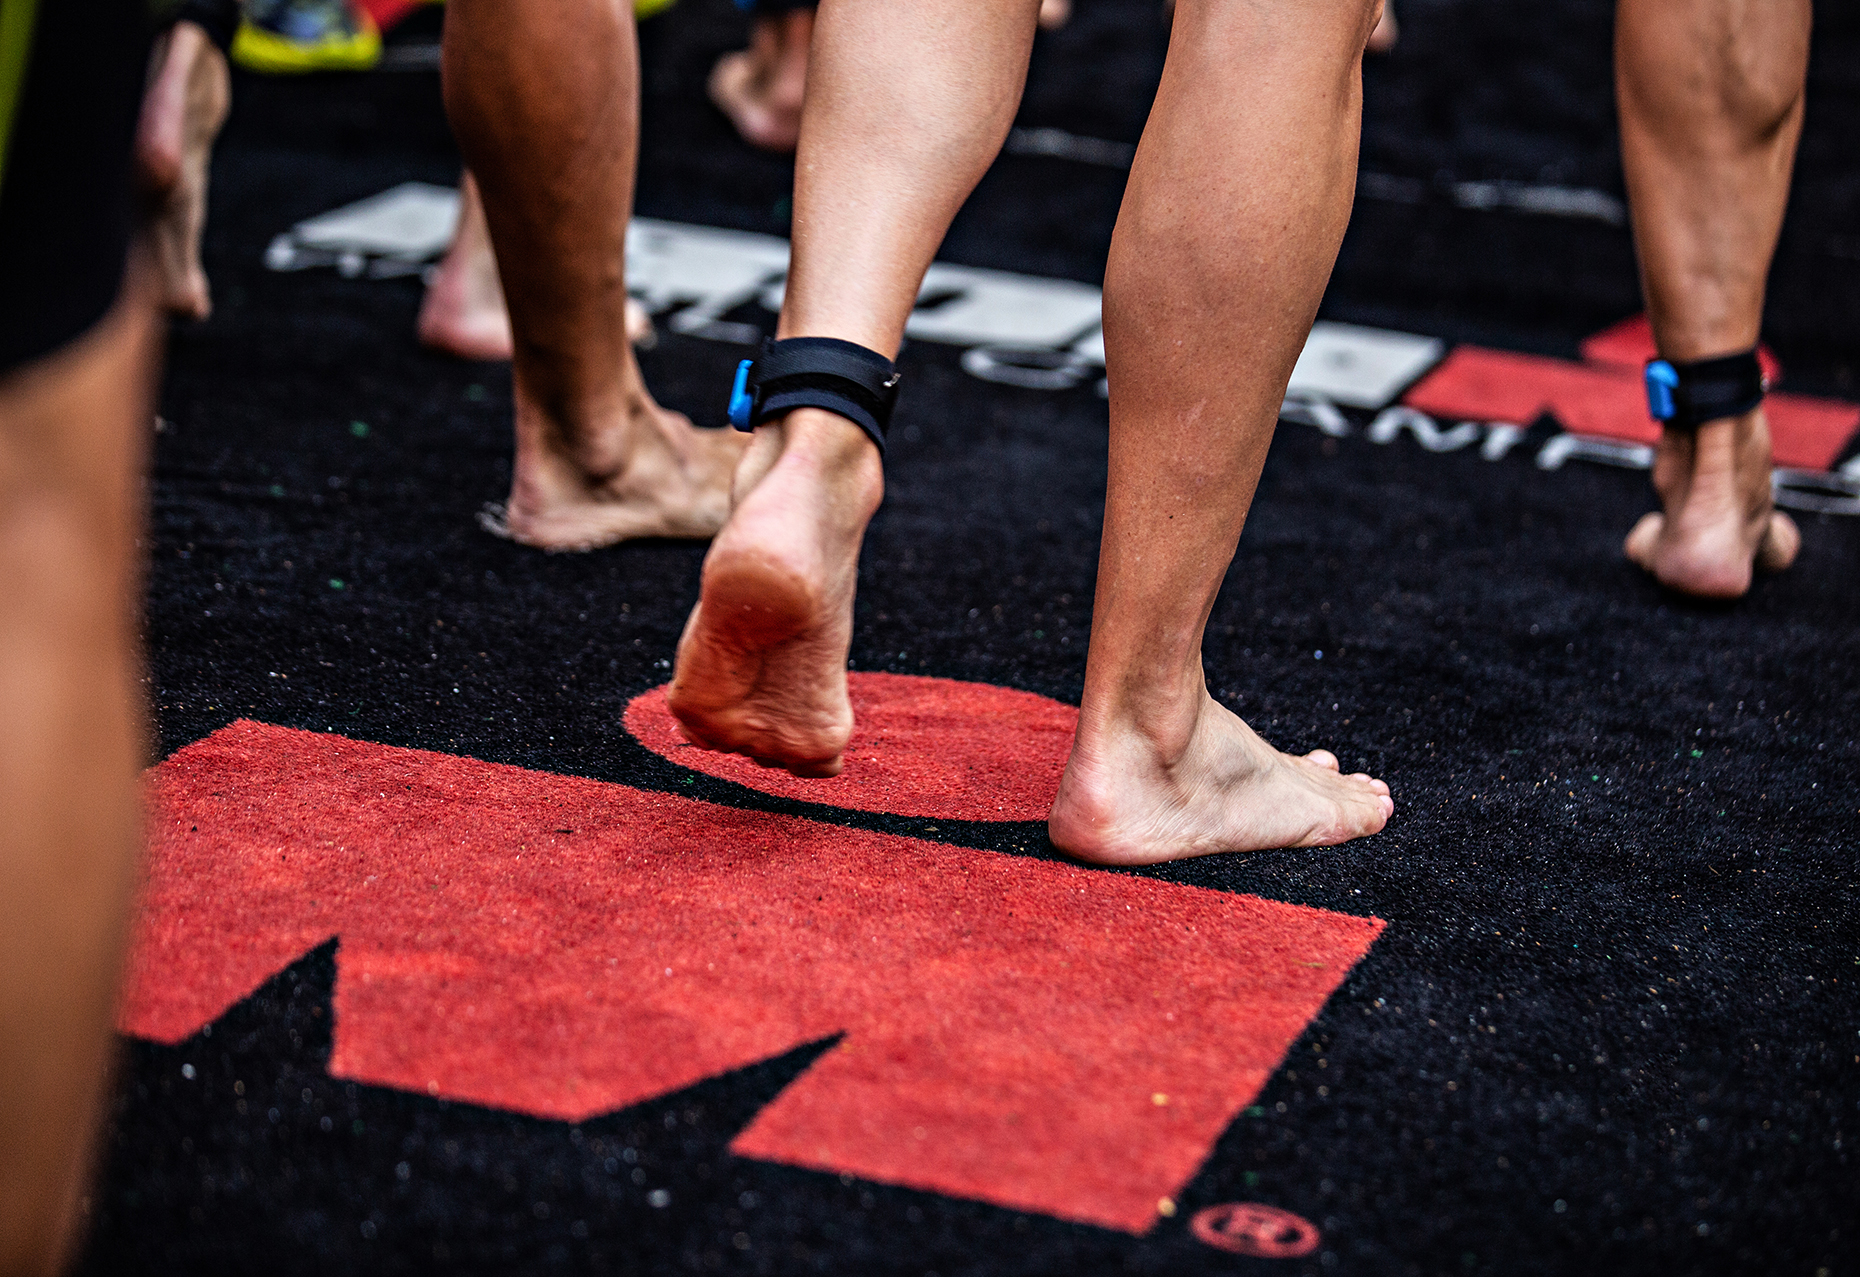 Commercial Photography Surfing Crossfit Ironman Group Los Angles | Daniel G Weiss